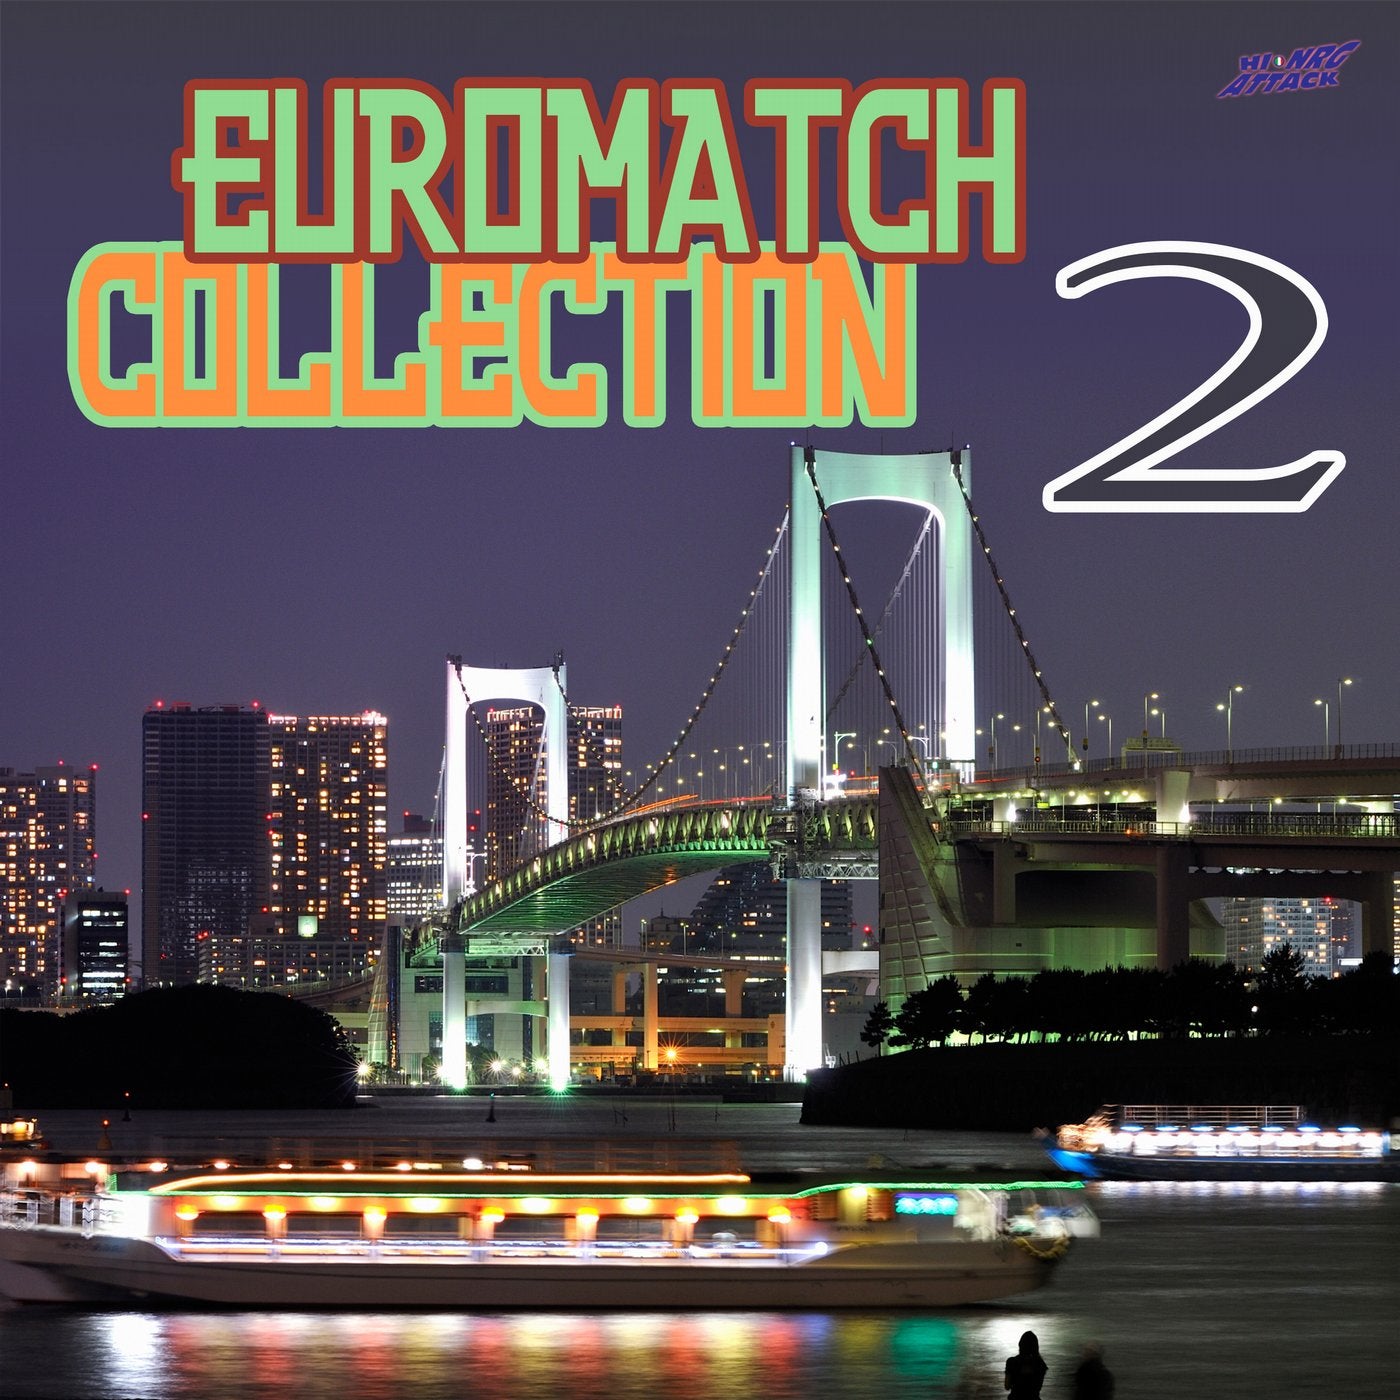 Euromatch Collection, Vol. 2